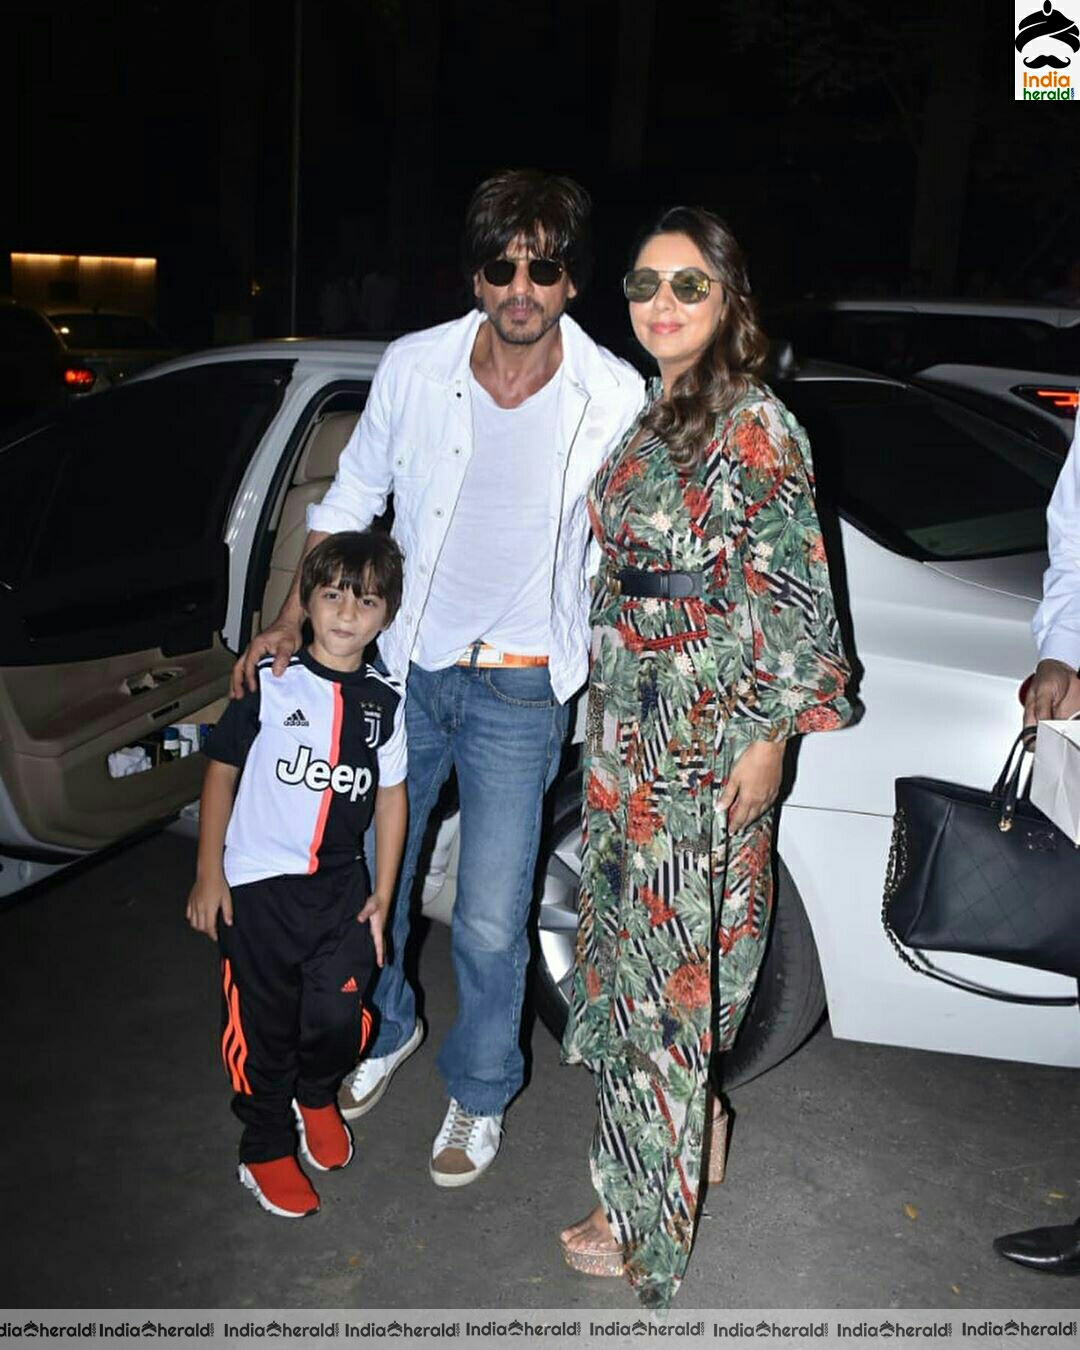 Shah Rukh Khan Spotted At Mumbai Airport With His family